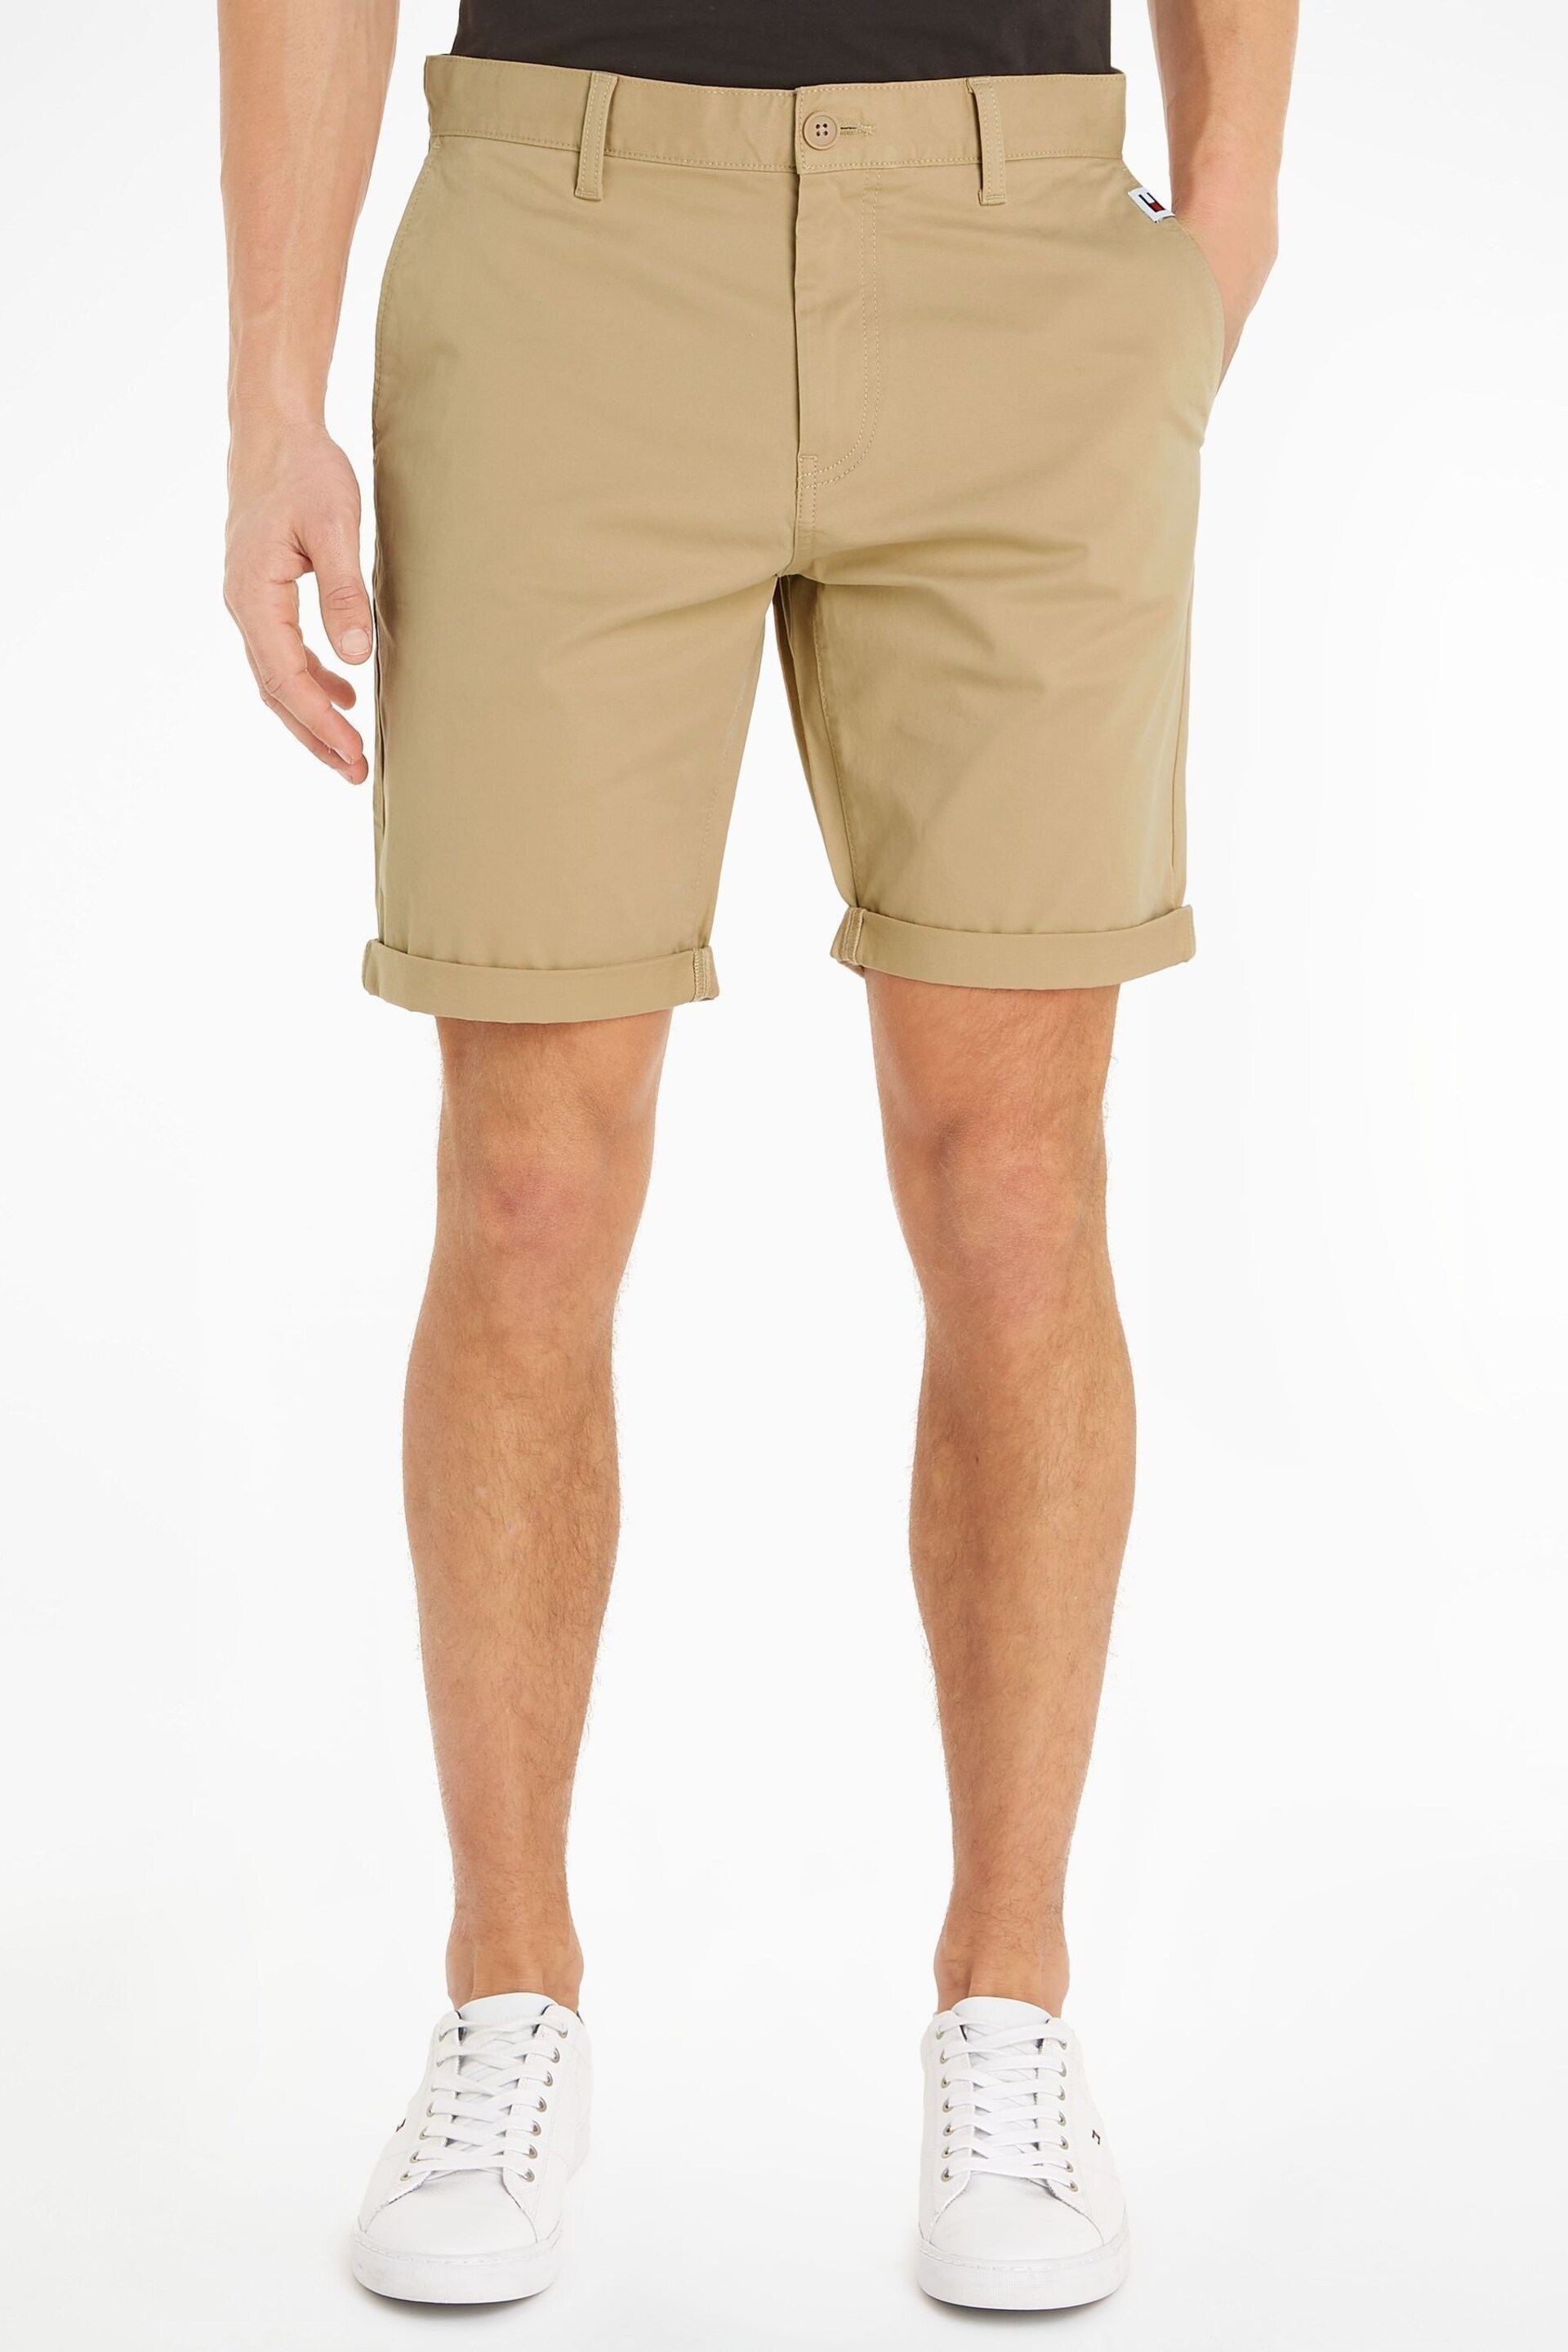 Tommy Jeans Scanton Shorts - Image 1 of 6